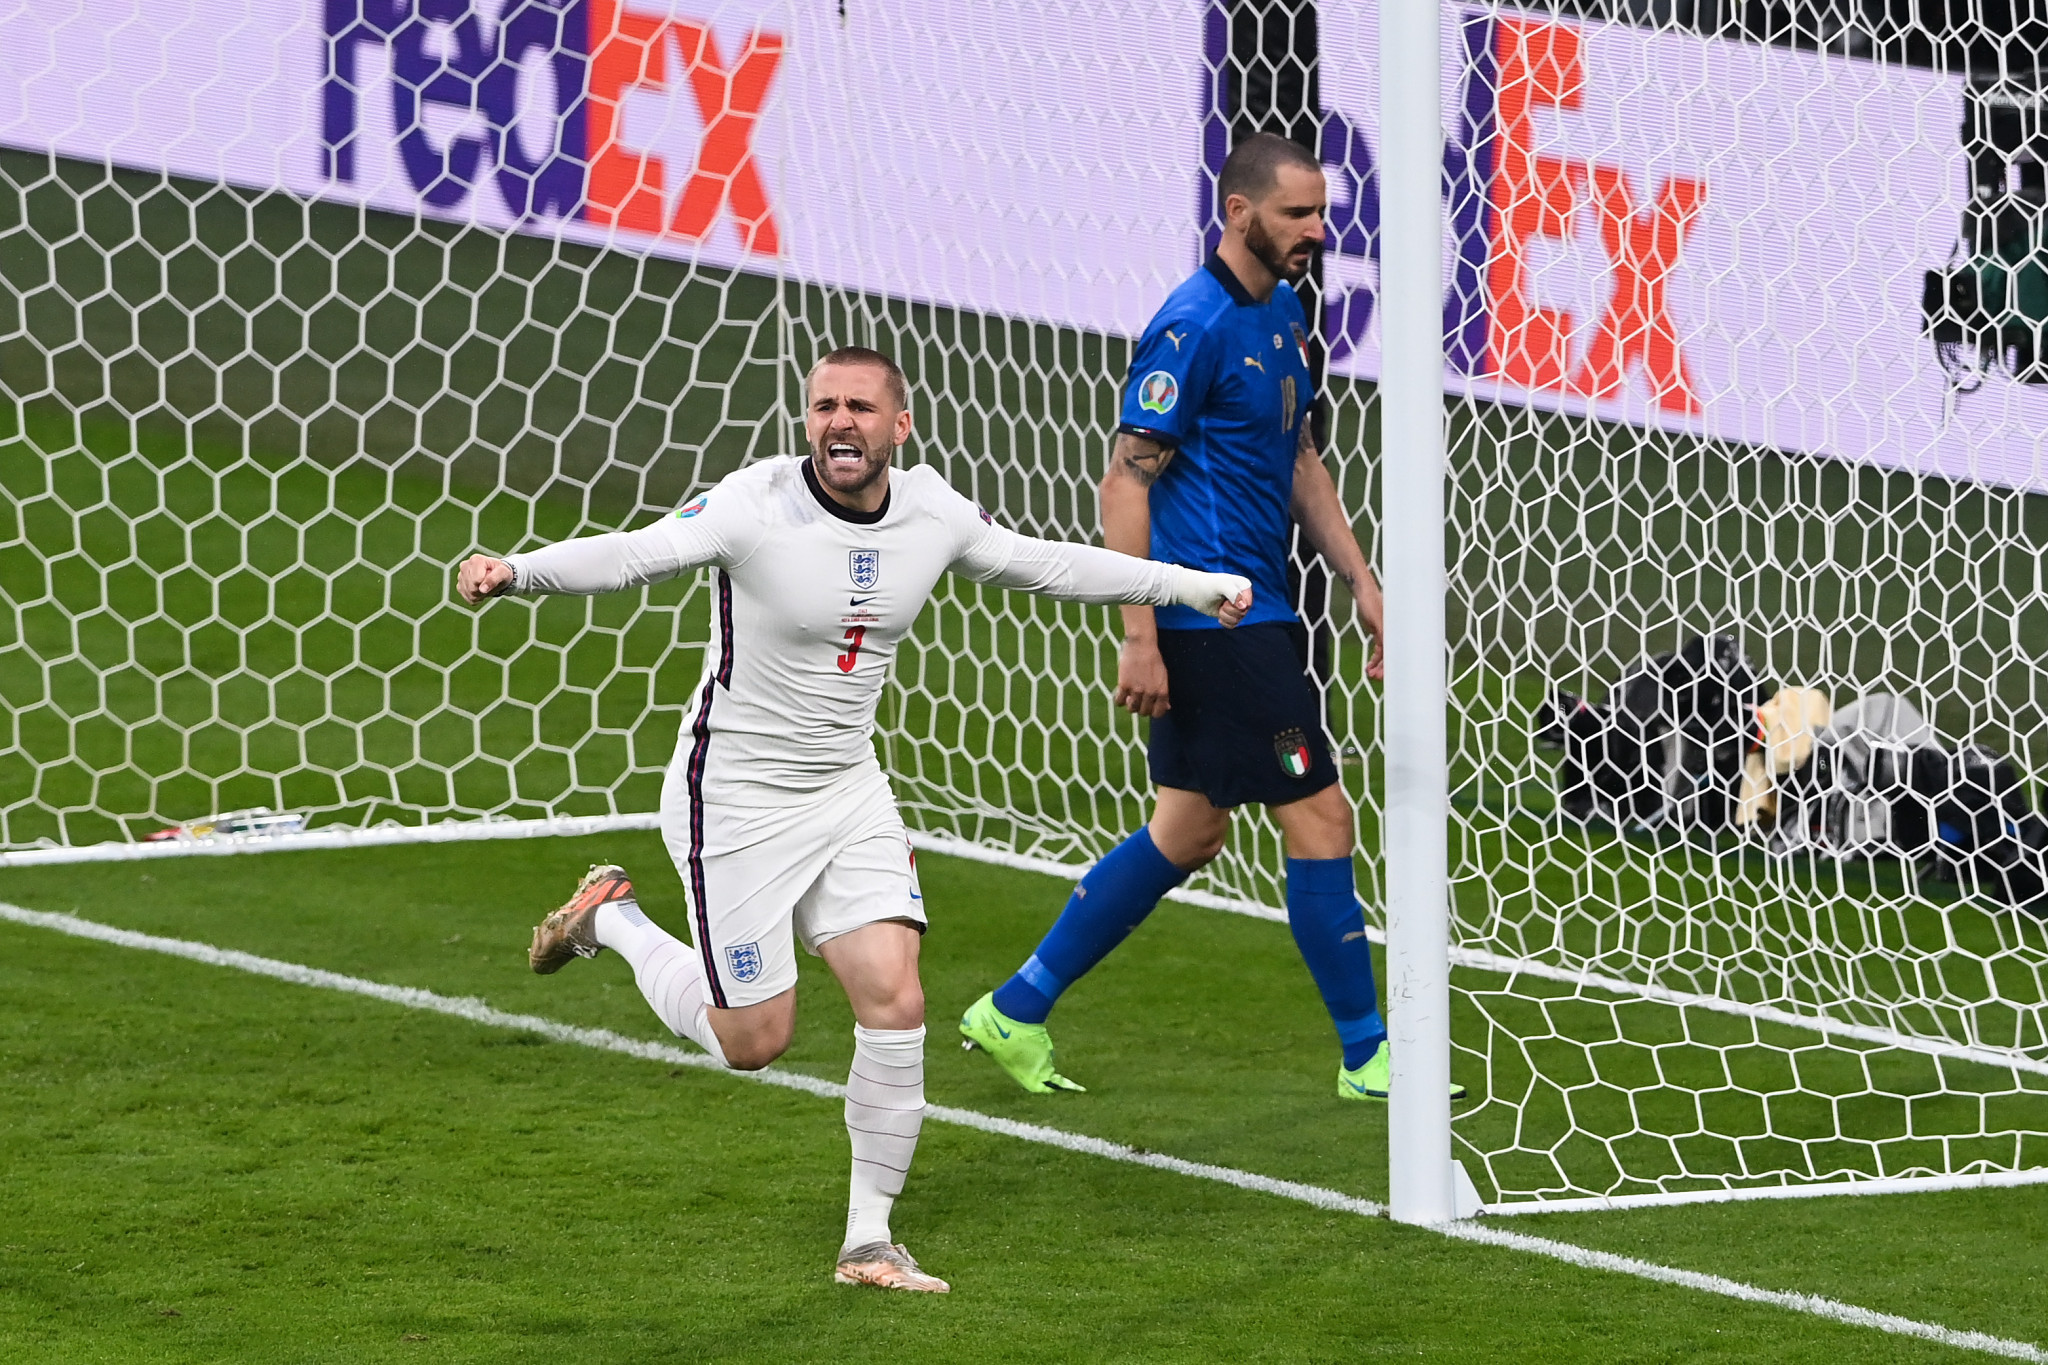 Luke Shaw gave England the dream start in the final, but it was downhill from there ©Getty Images